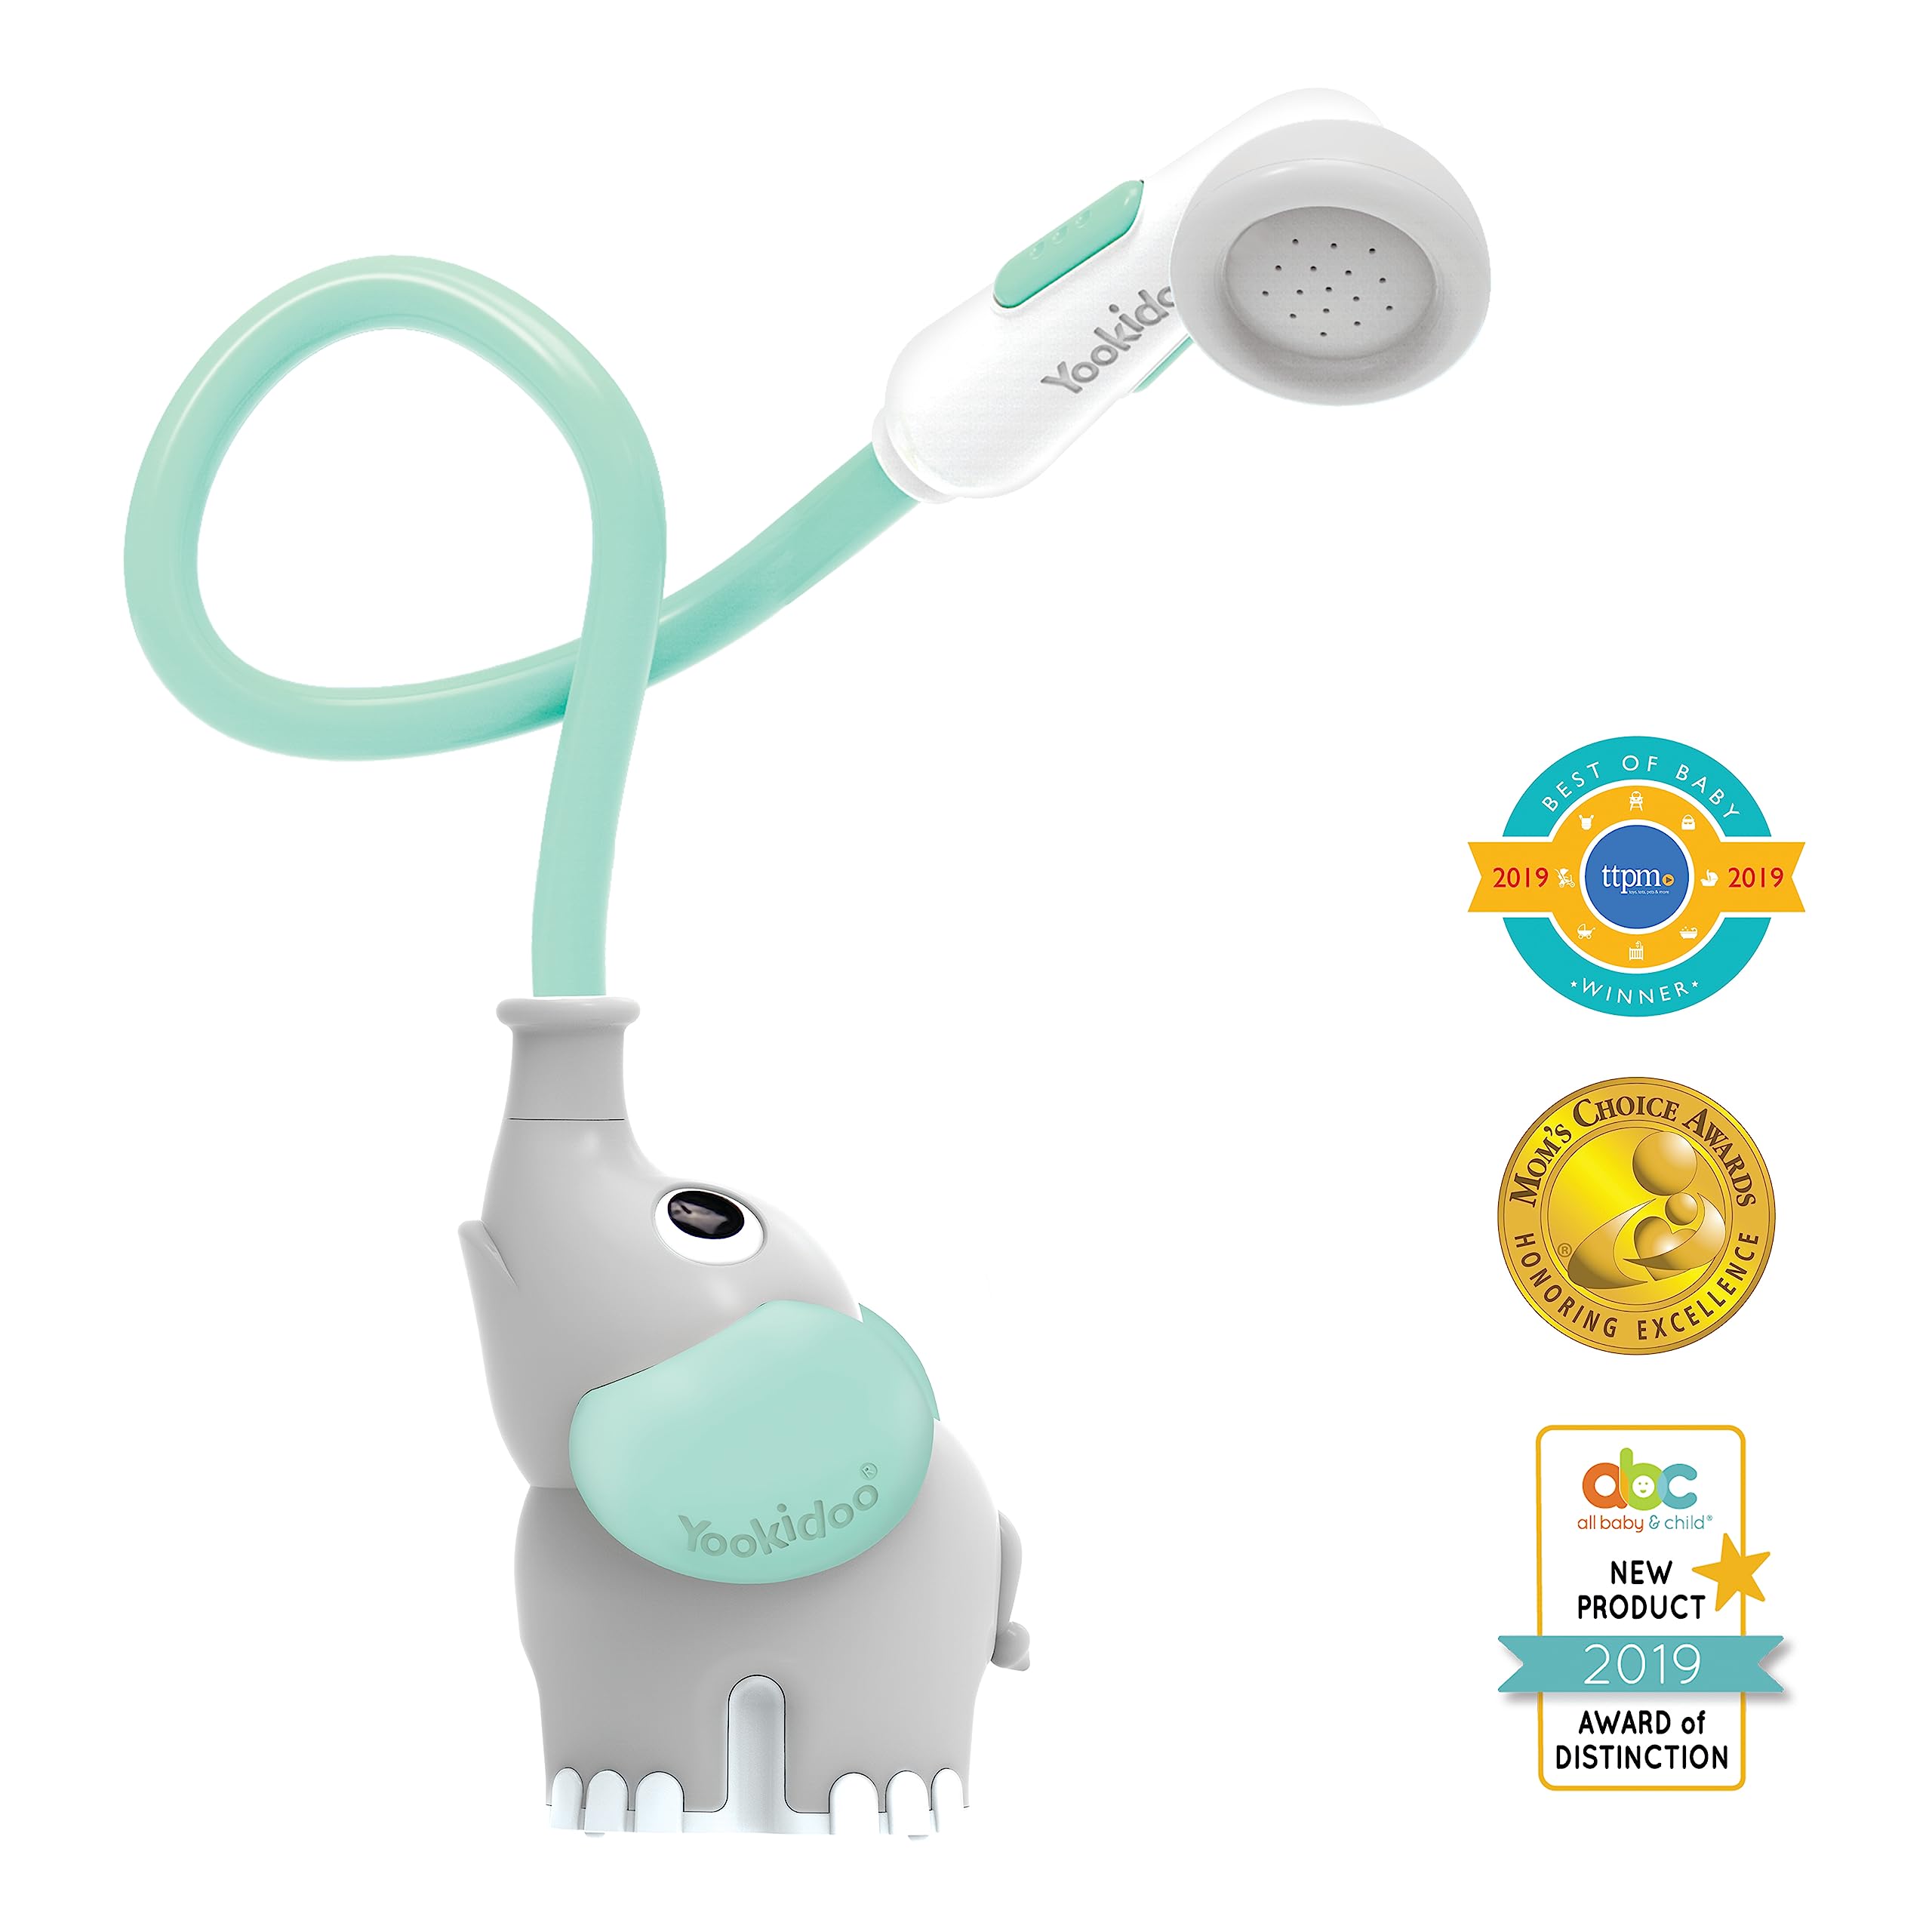 Yookidoo Baby Bath Shower Head - Elephant Water Pump with Trunk Spout Rinser - Control Water Flow from 2 Elephant Trunk Knobs for Maximum Fun in Tub or Sink for Newborn Babies (Turquoise)